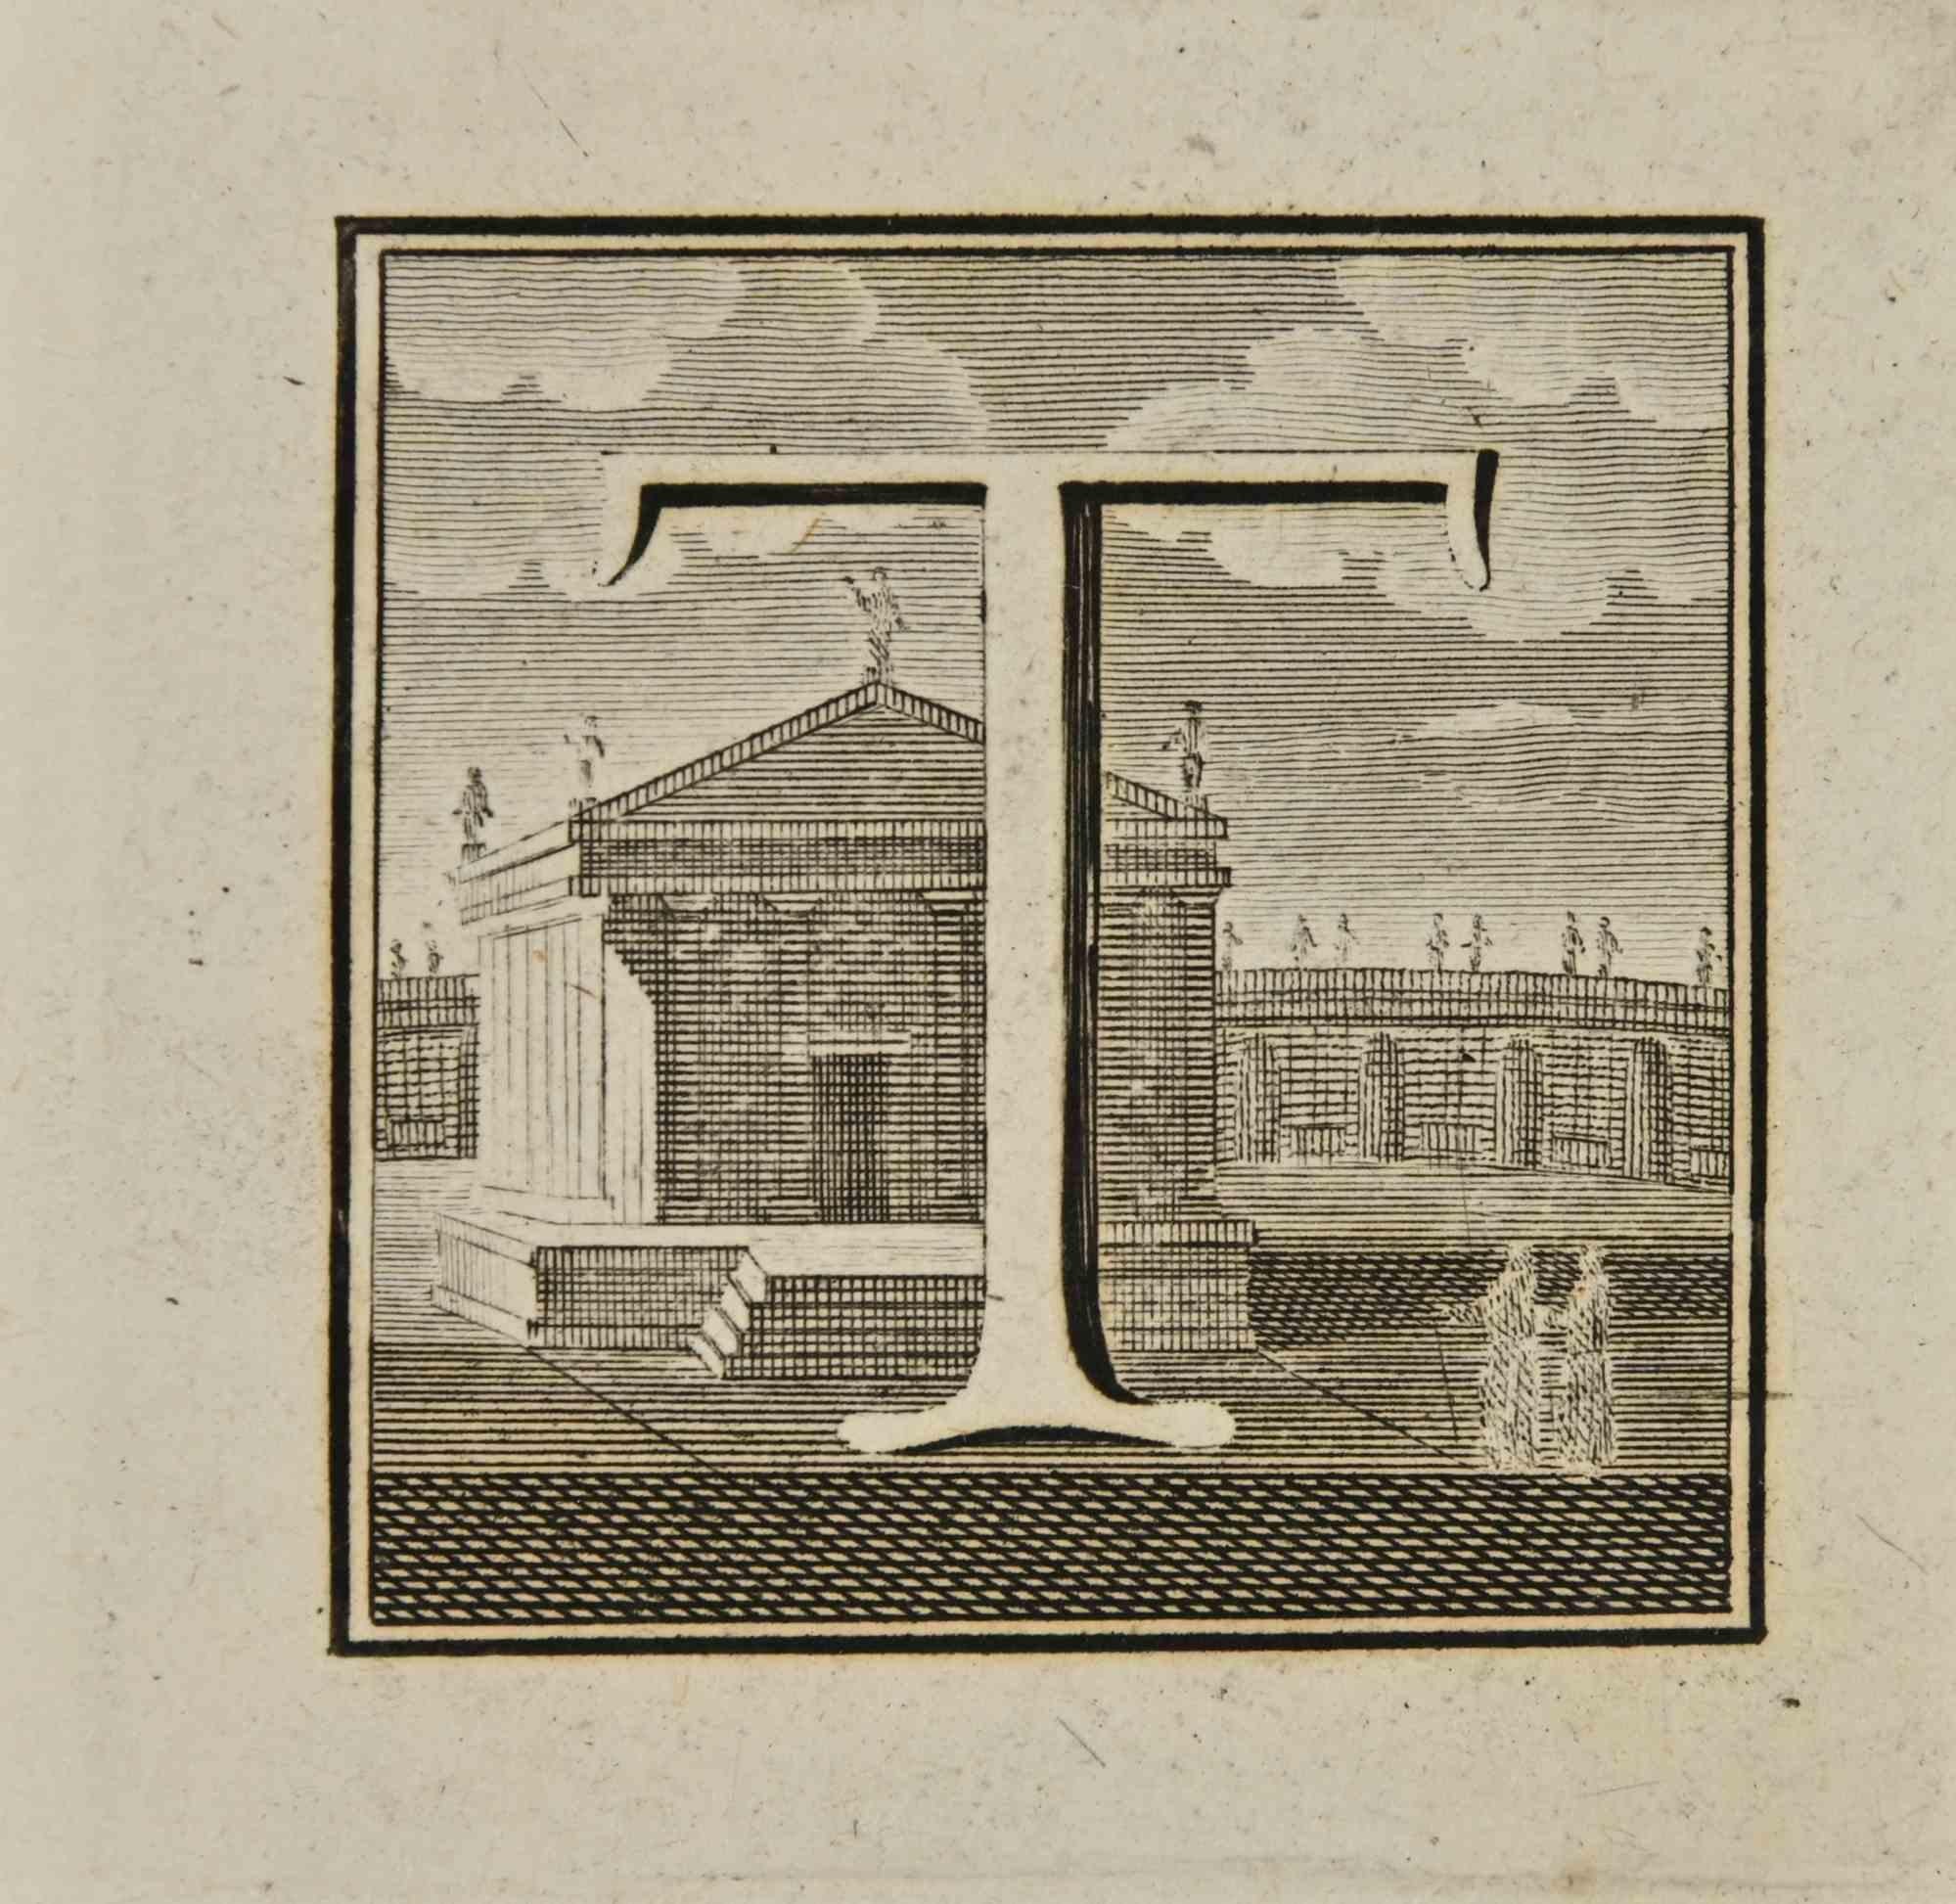 Letter of the Alphabet T,  from the series "Antiquities of Herculaneum", is an etching on paper realized by Luigi Vanvitelli in the 18th century.

Good conditions.

The etching belongs to the print suite “Antiquities of Herculaneum Exposed”